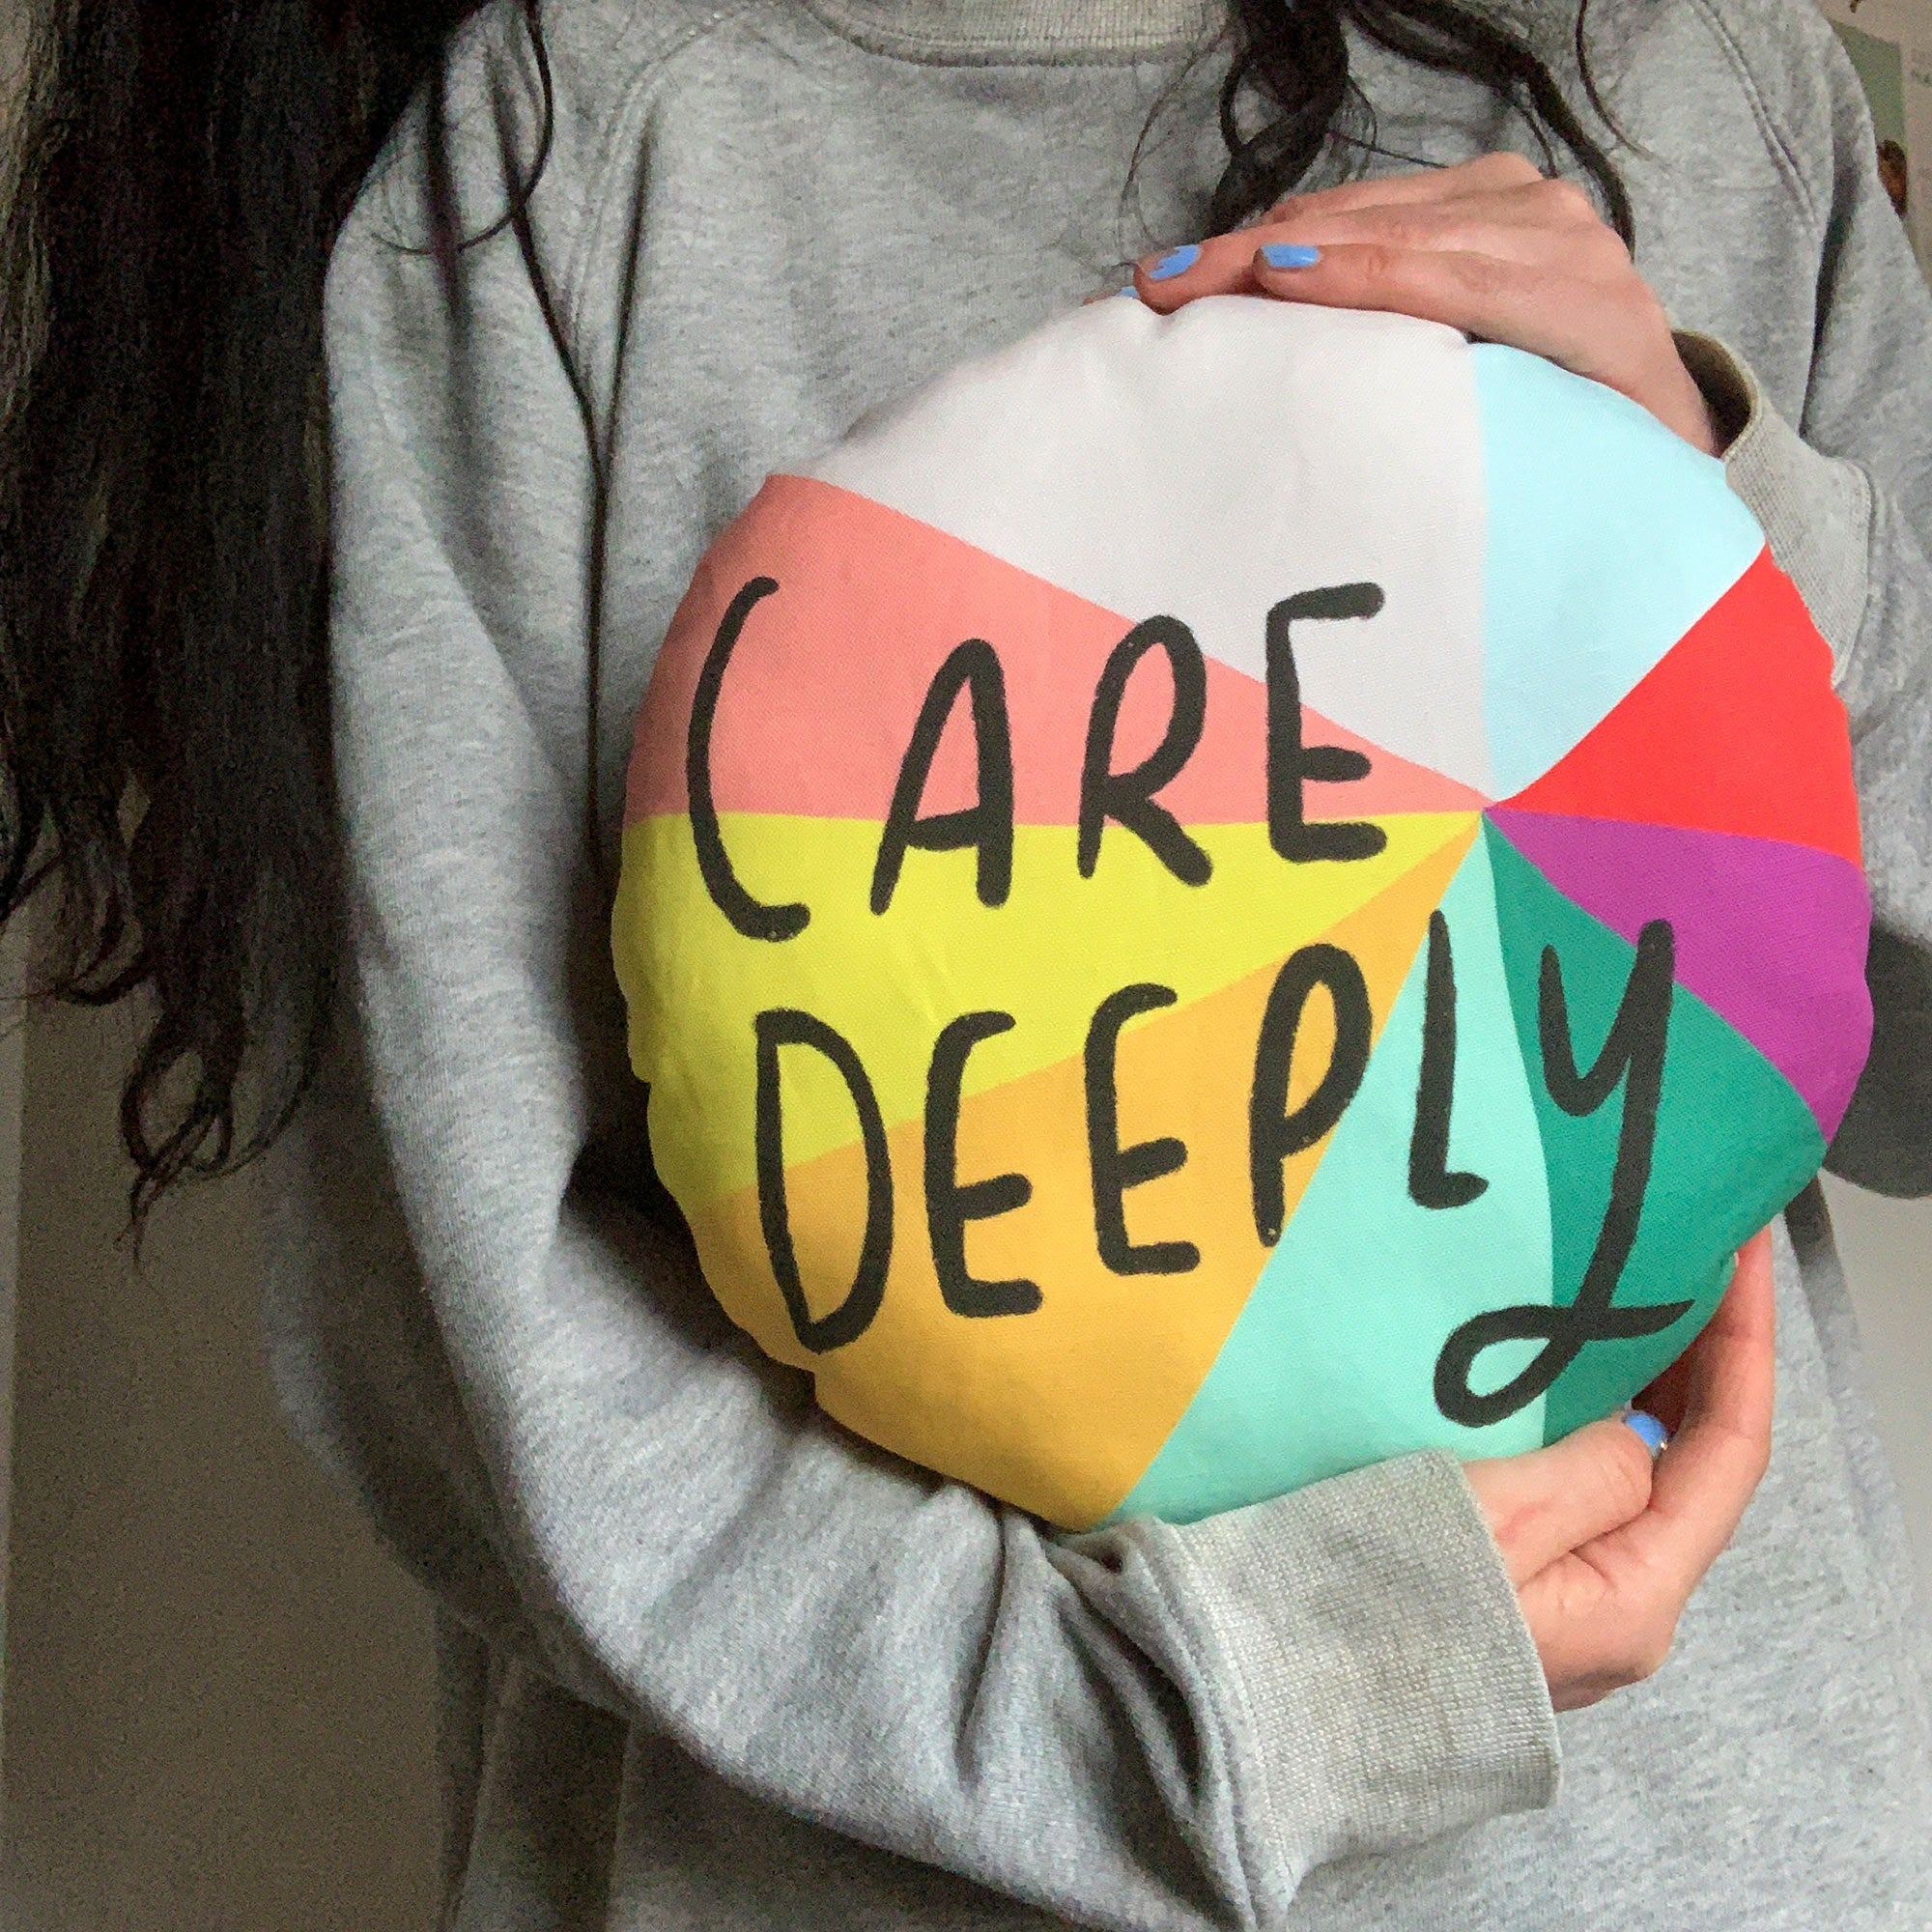 CARE DEEPLY plushie